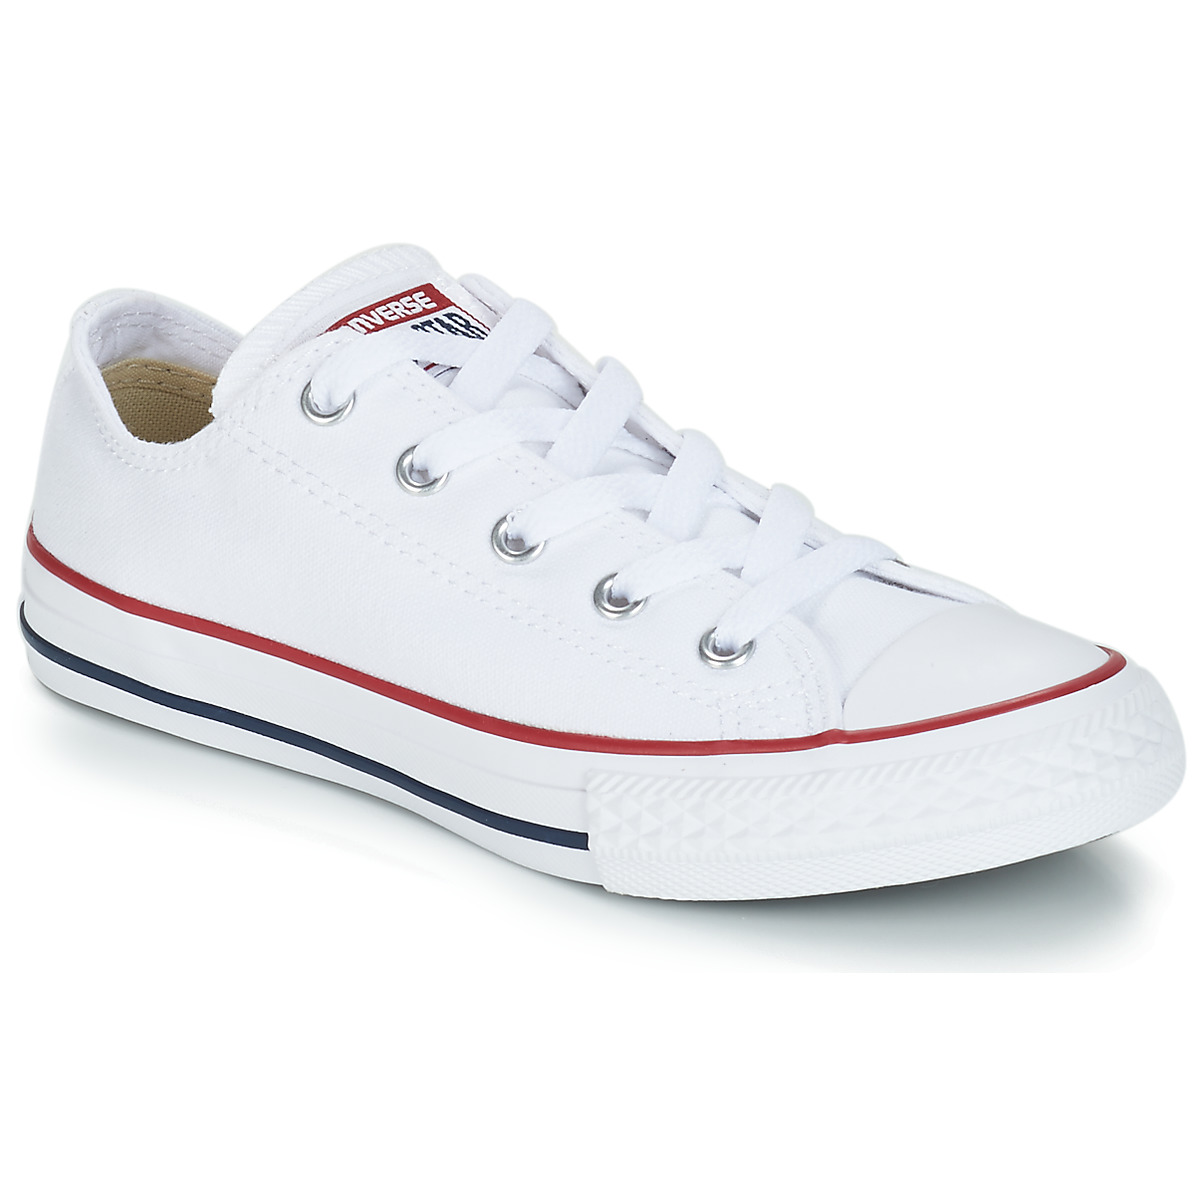 converse all star blanche basse pas cher